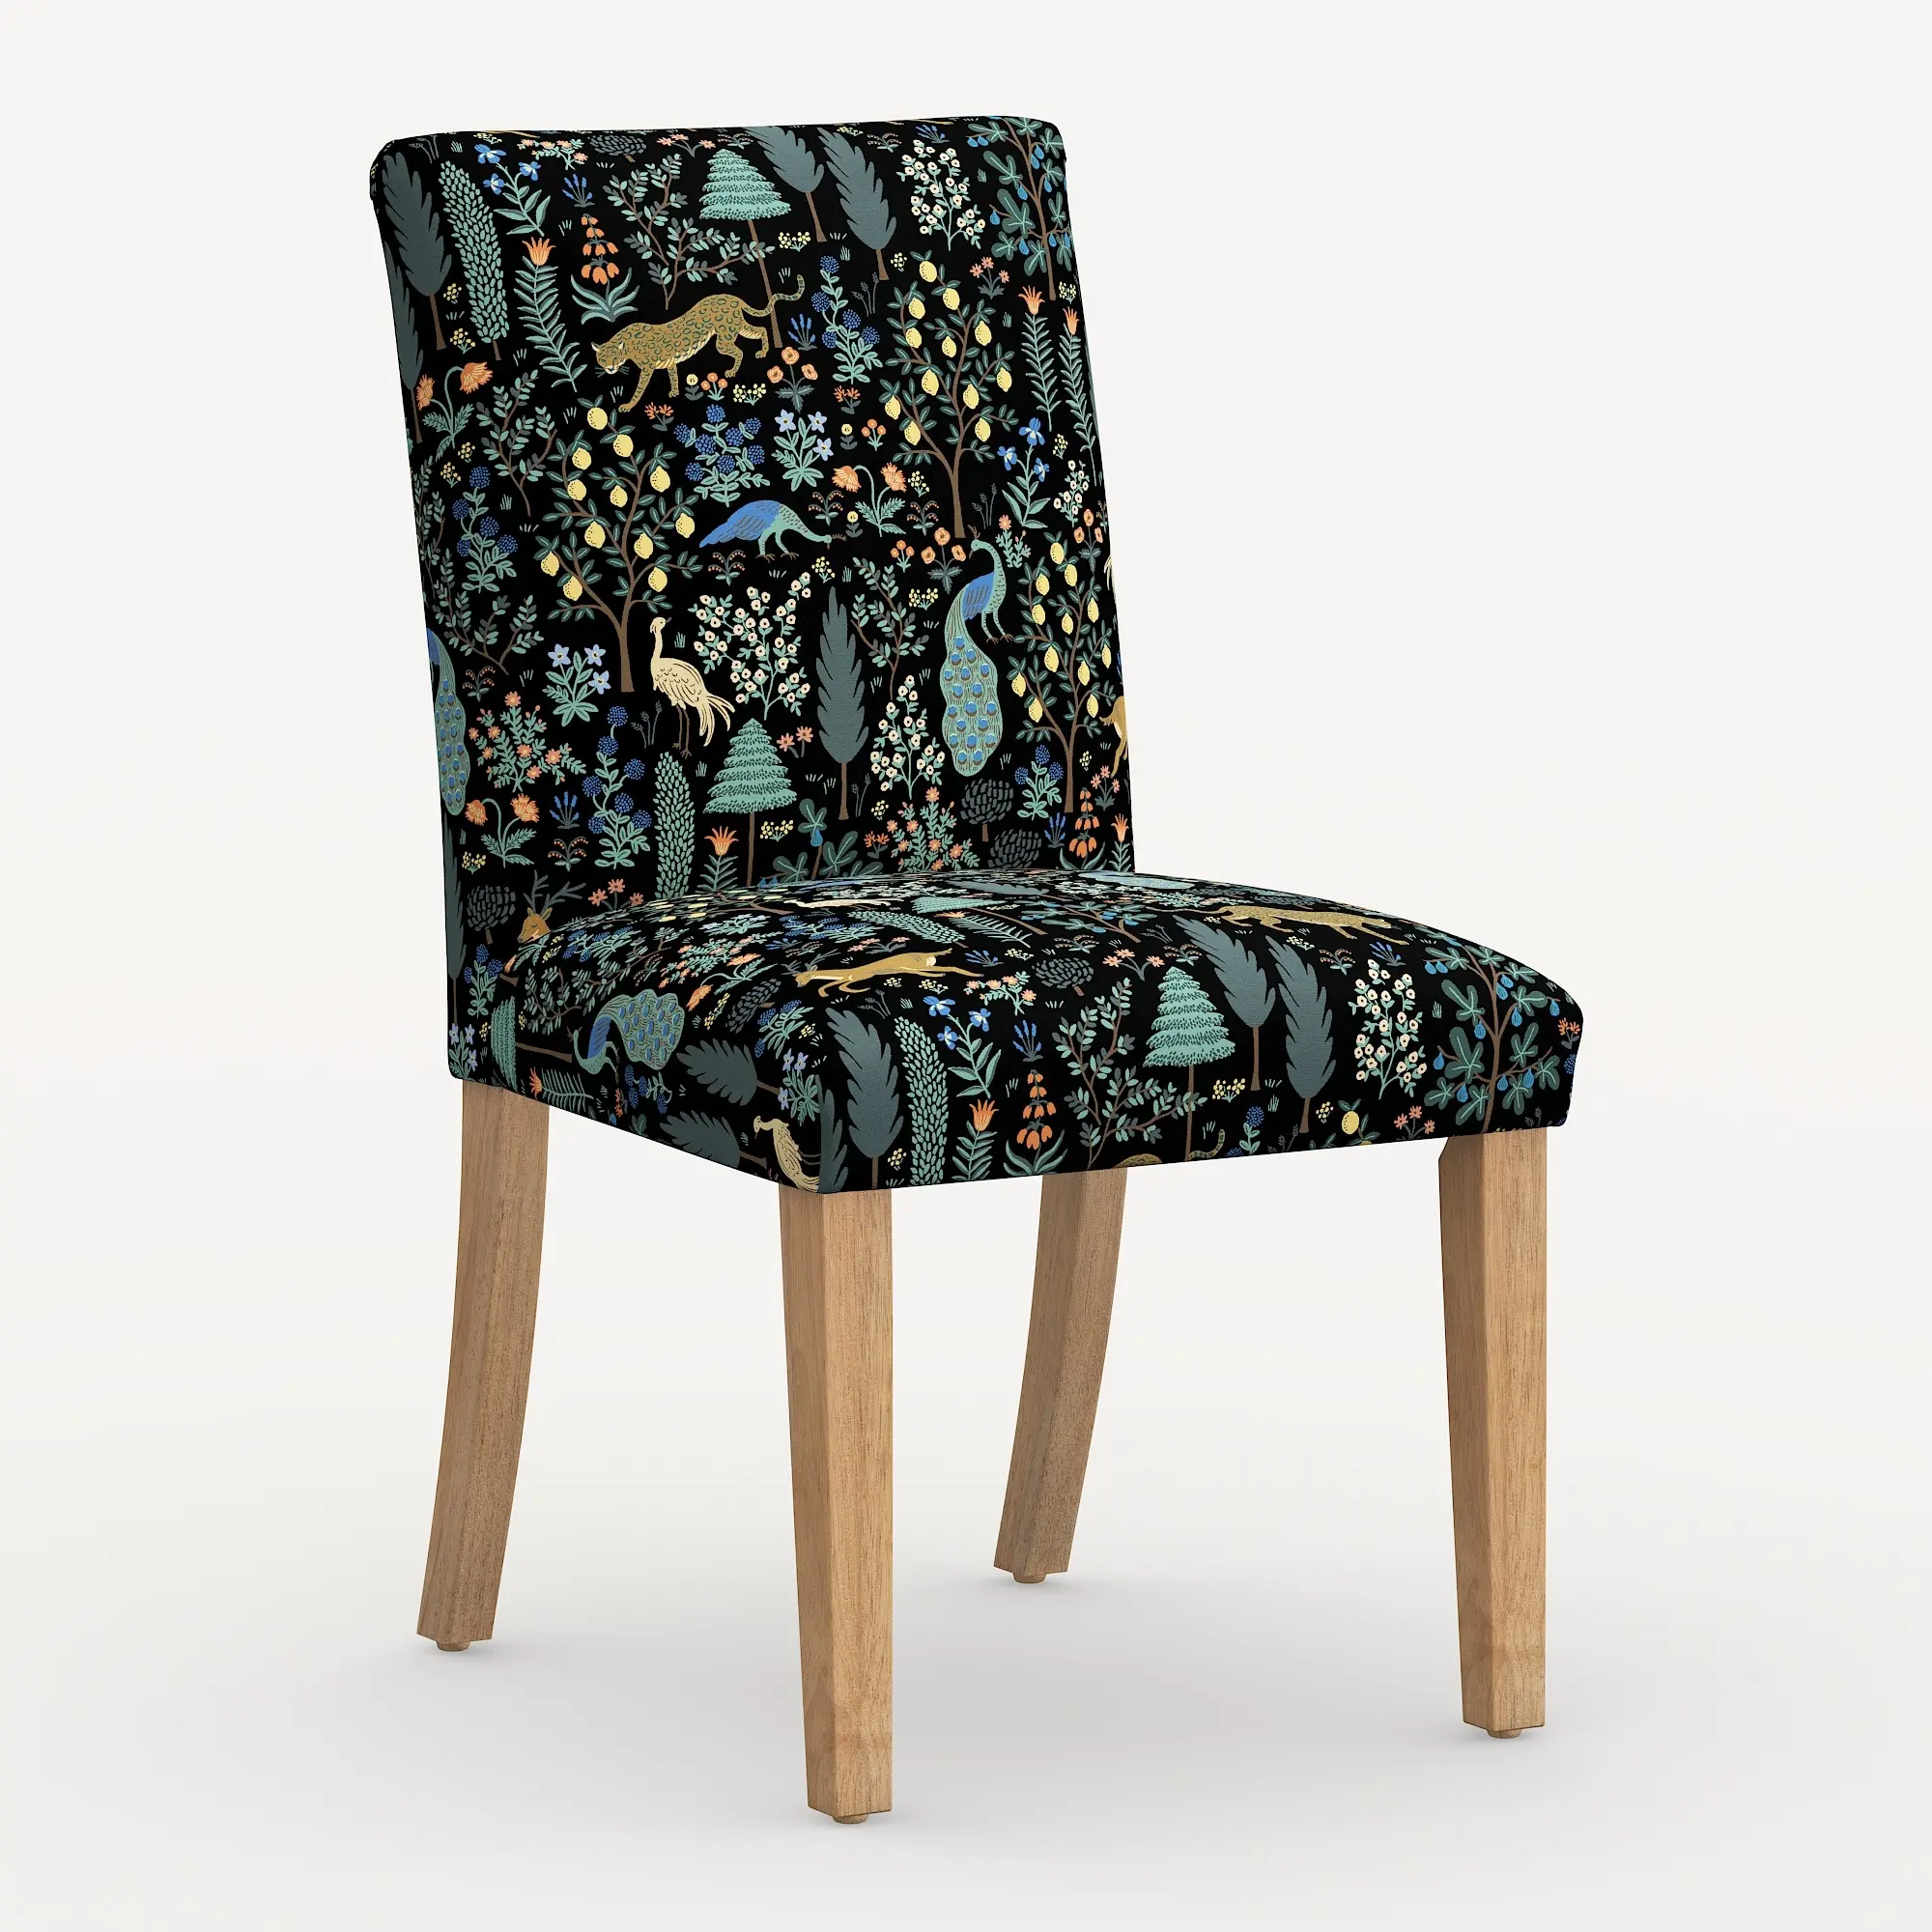 Rifle Paper Co. Lorraine Menagerie Black Dining Chair